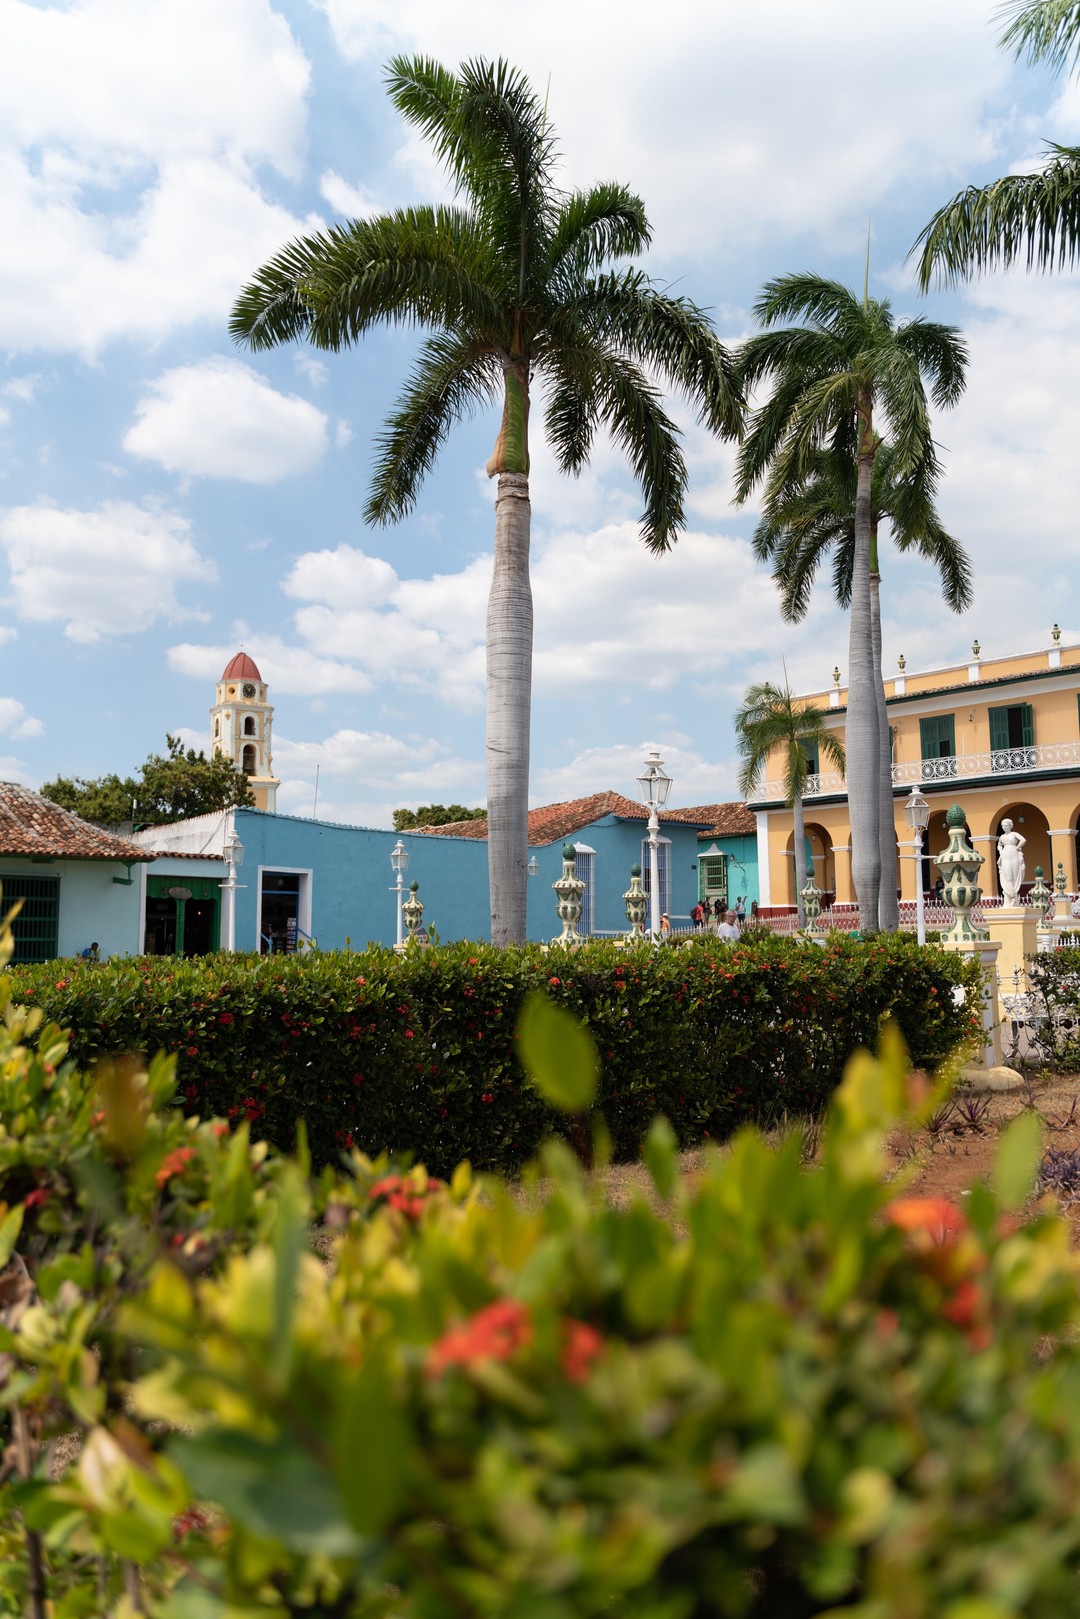 Trinidad, Cuba: One of the best romantic getaways for couples who love culture.